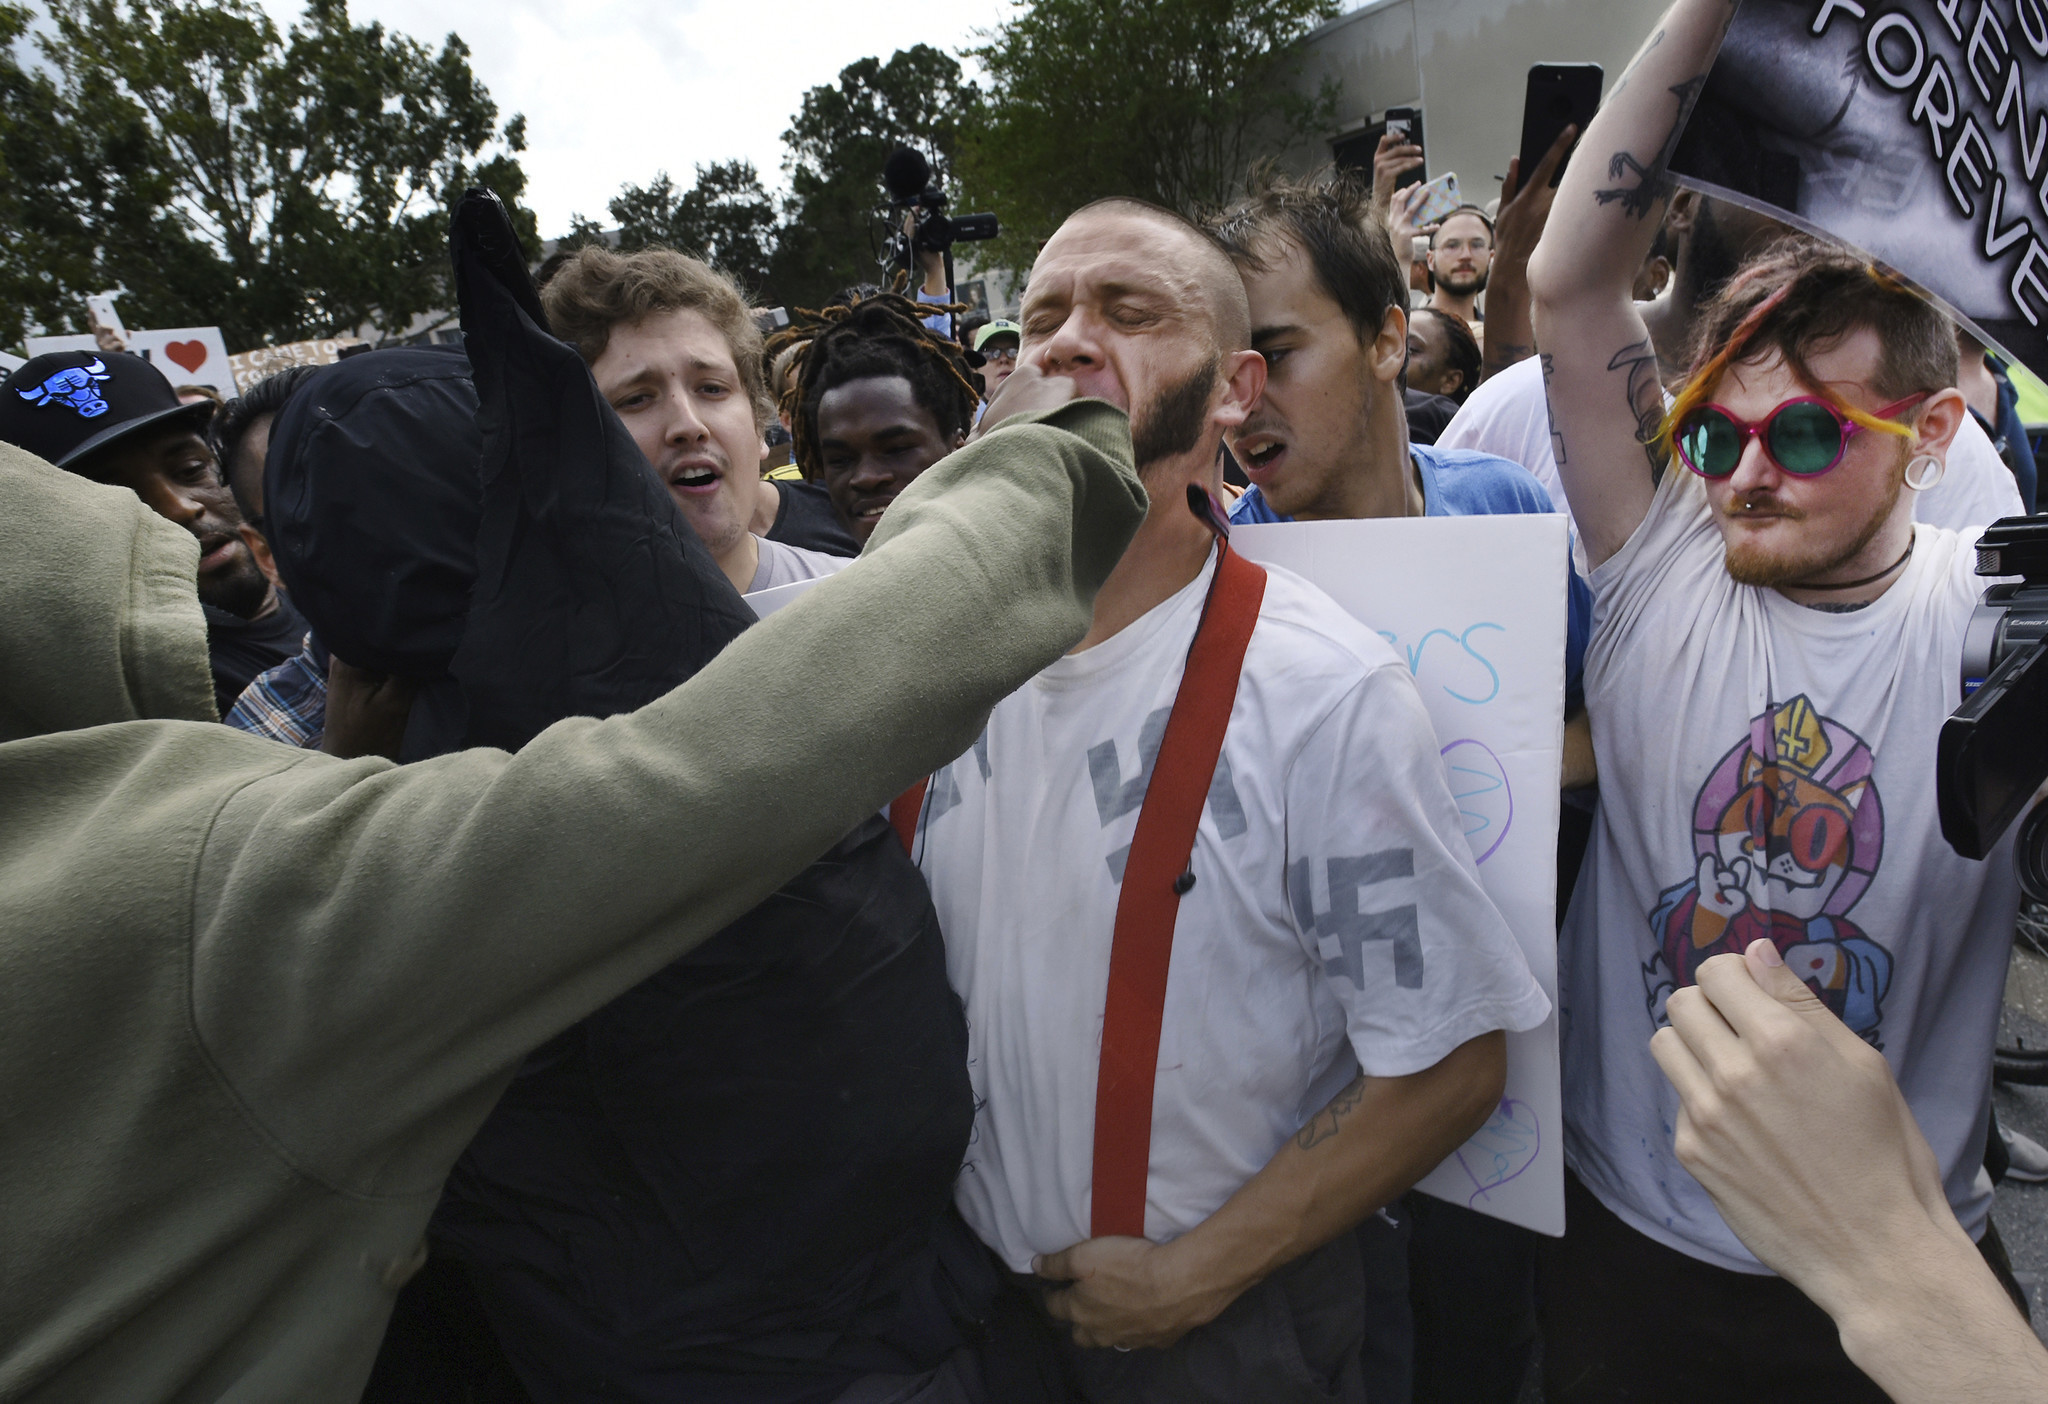 'Why do you hate me?' black protester asked white nationalist. 'I don't